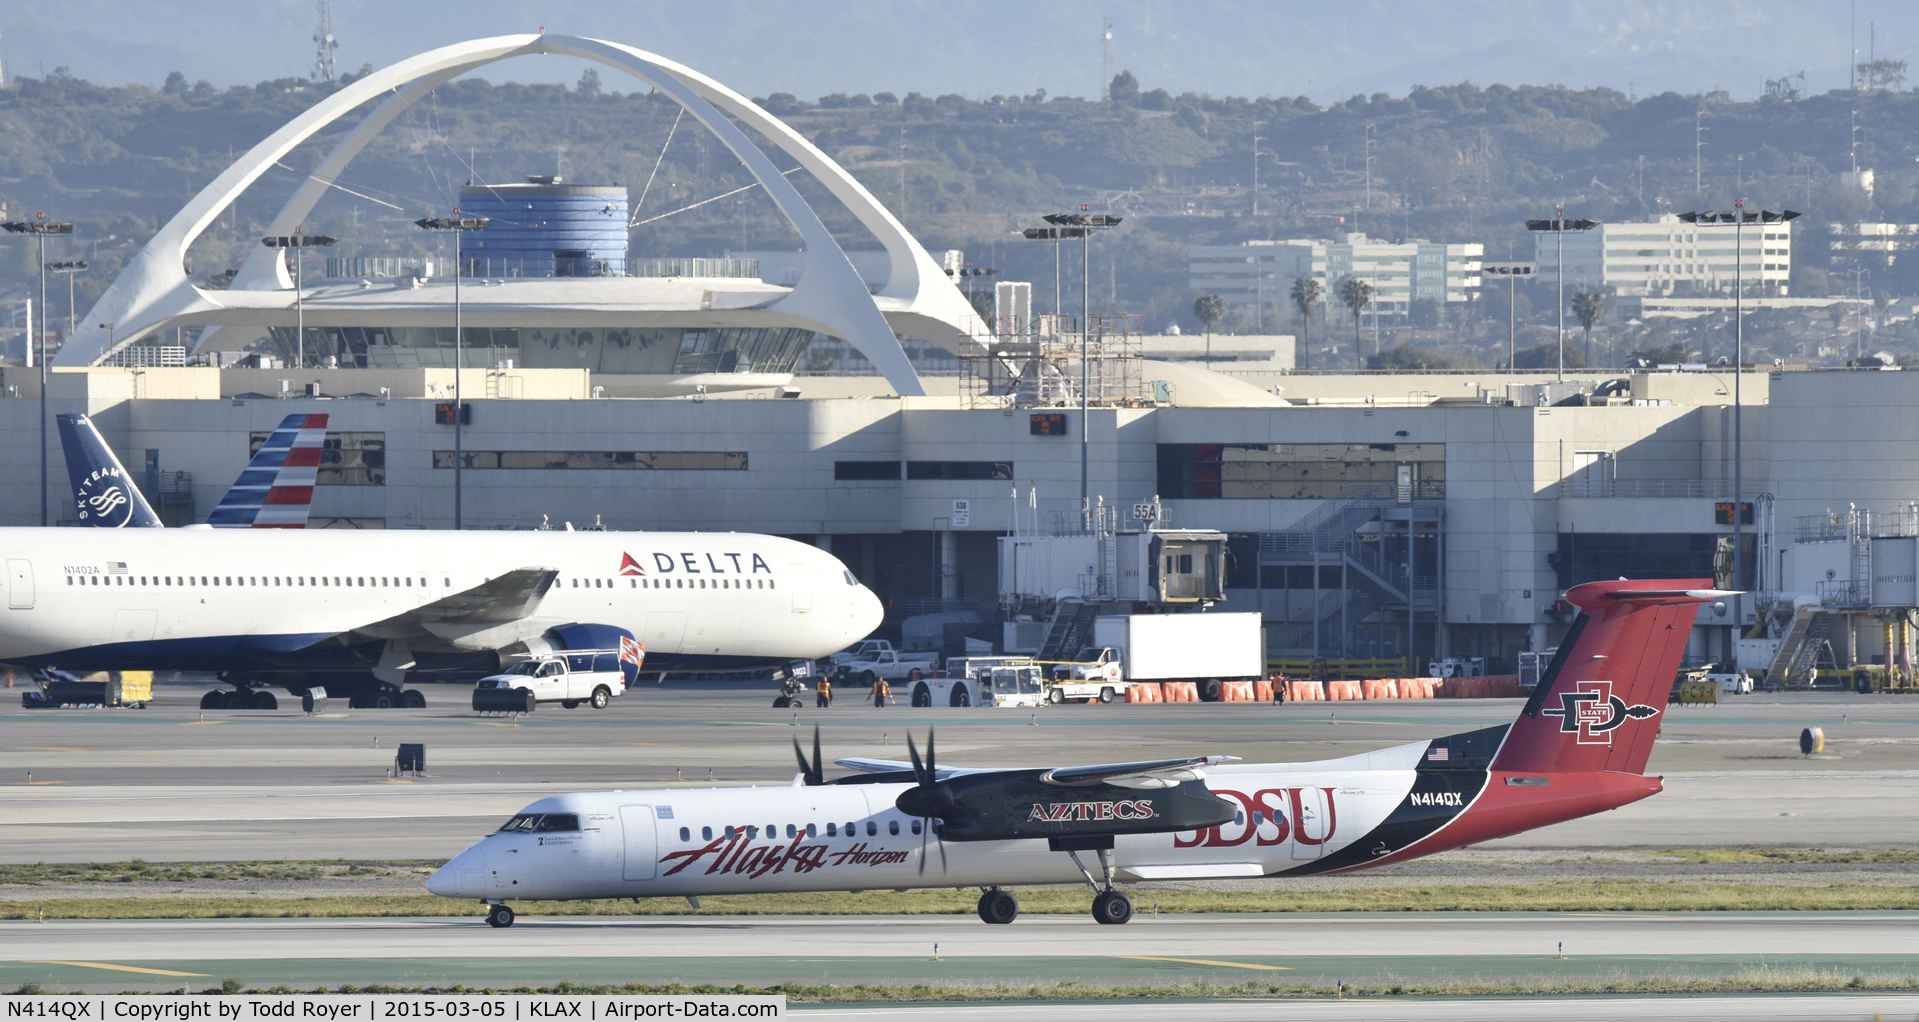 N414QX, 2002 Bombardier DHC-8-402 Dash 8 C/N 4061, Arrived at LAX on 25L